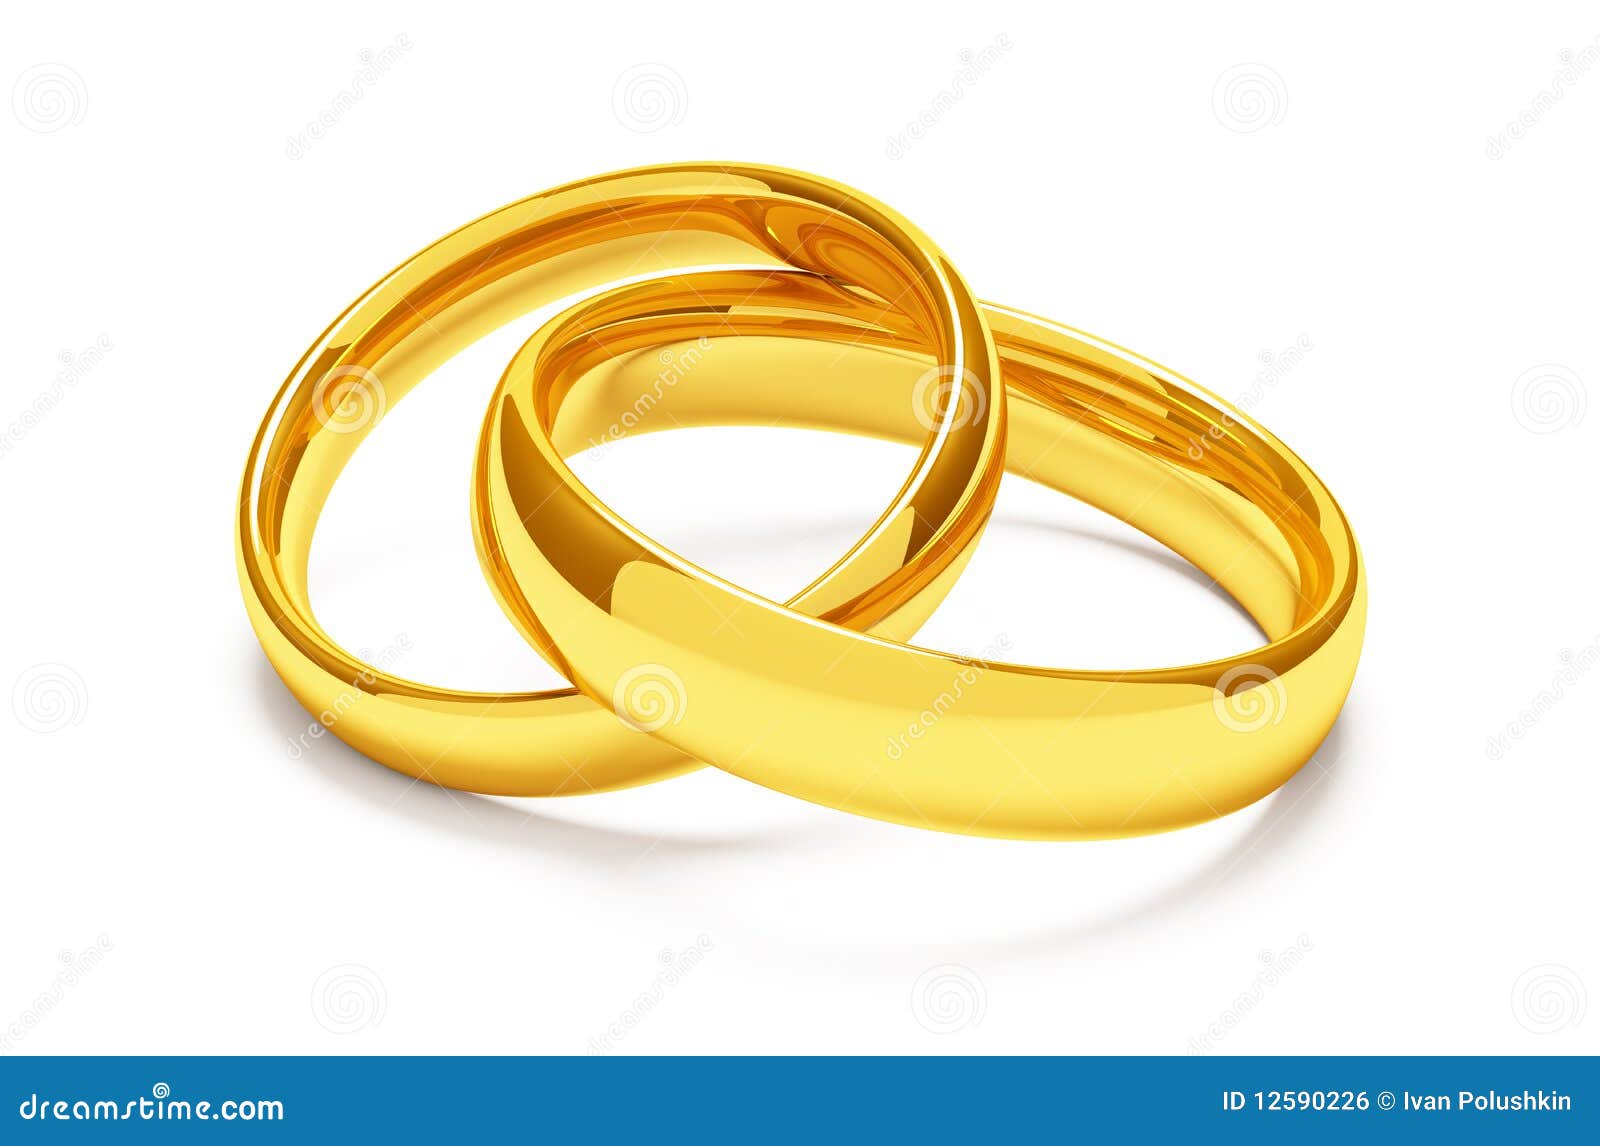 two gold wedding rings lie together mr no pr no 2 1209 2